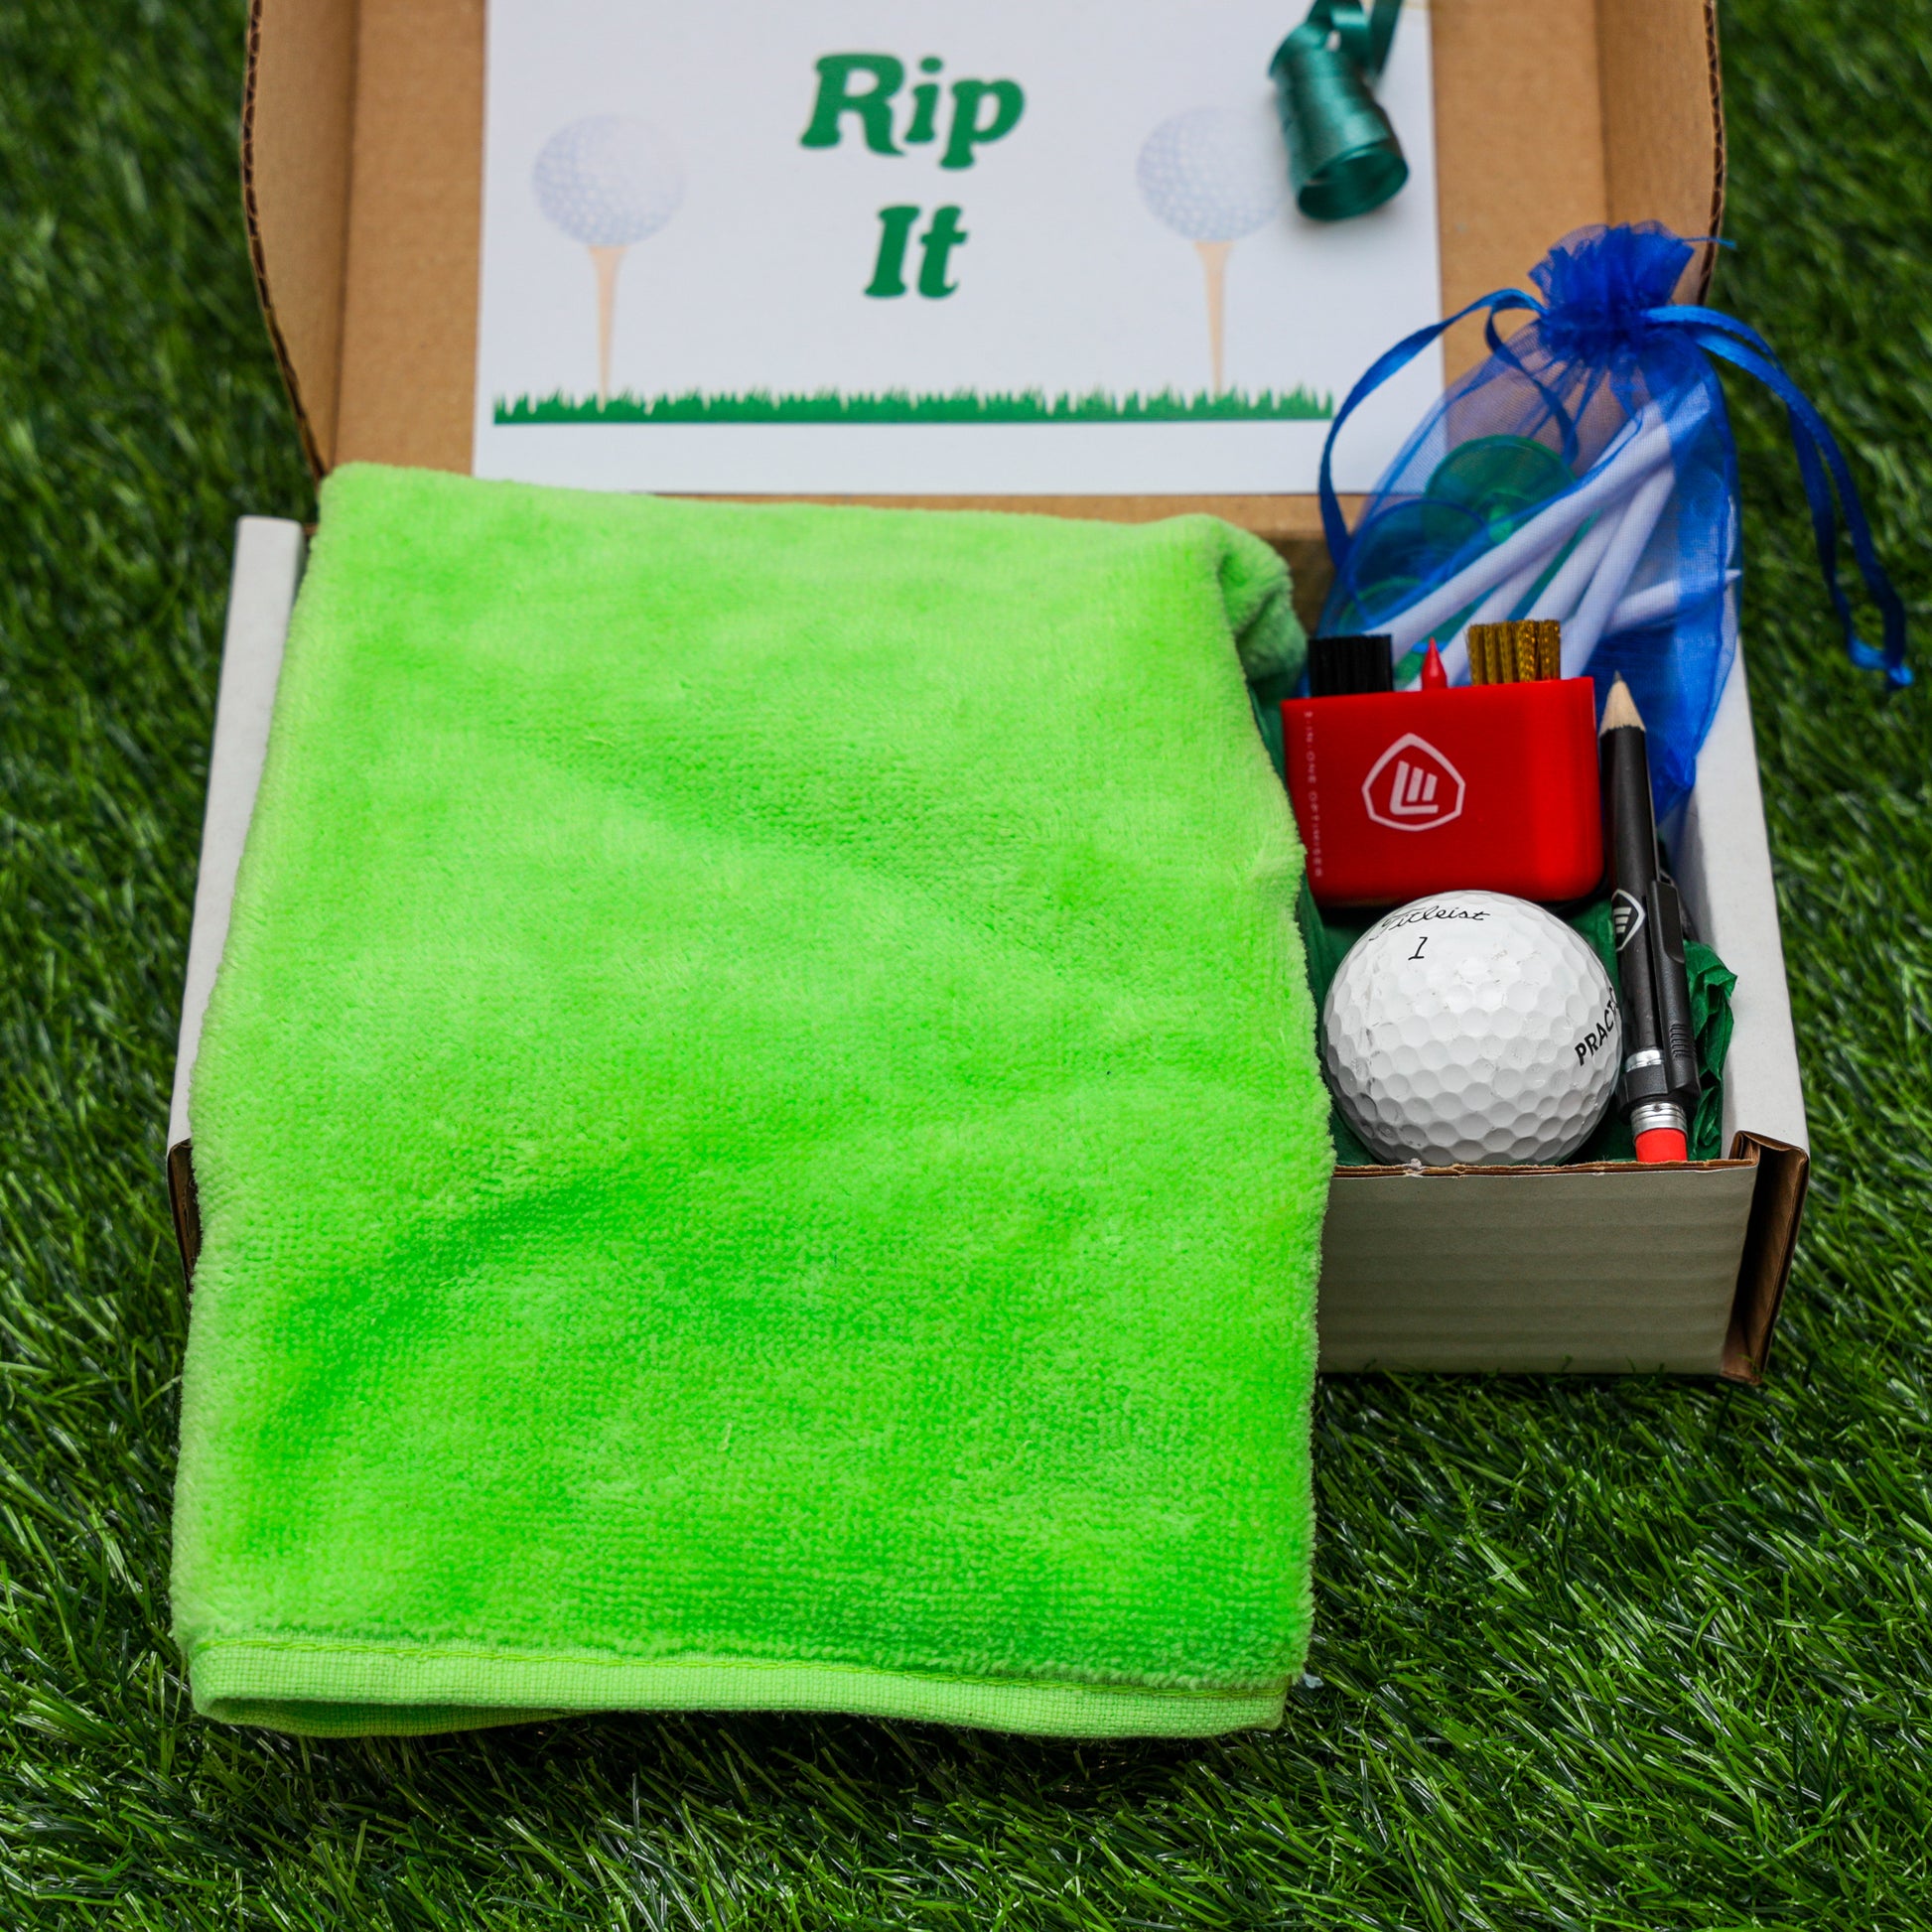 Personalised Tri Fold Golf Towel with Name Golfing Gift Box  - Always Looking Good - Lime Green  